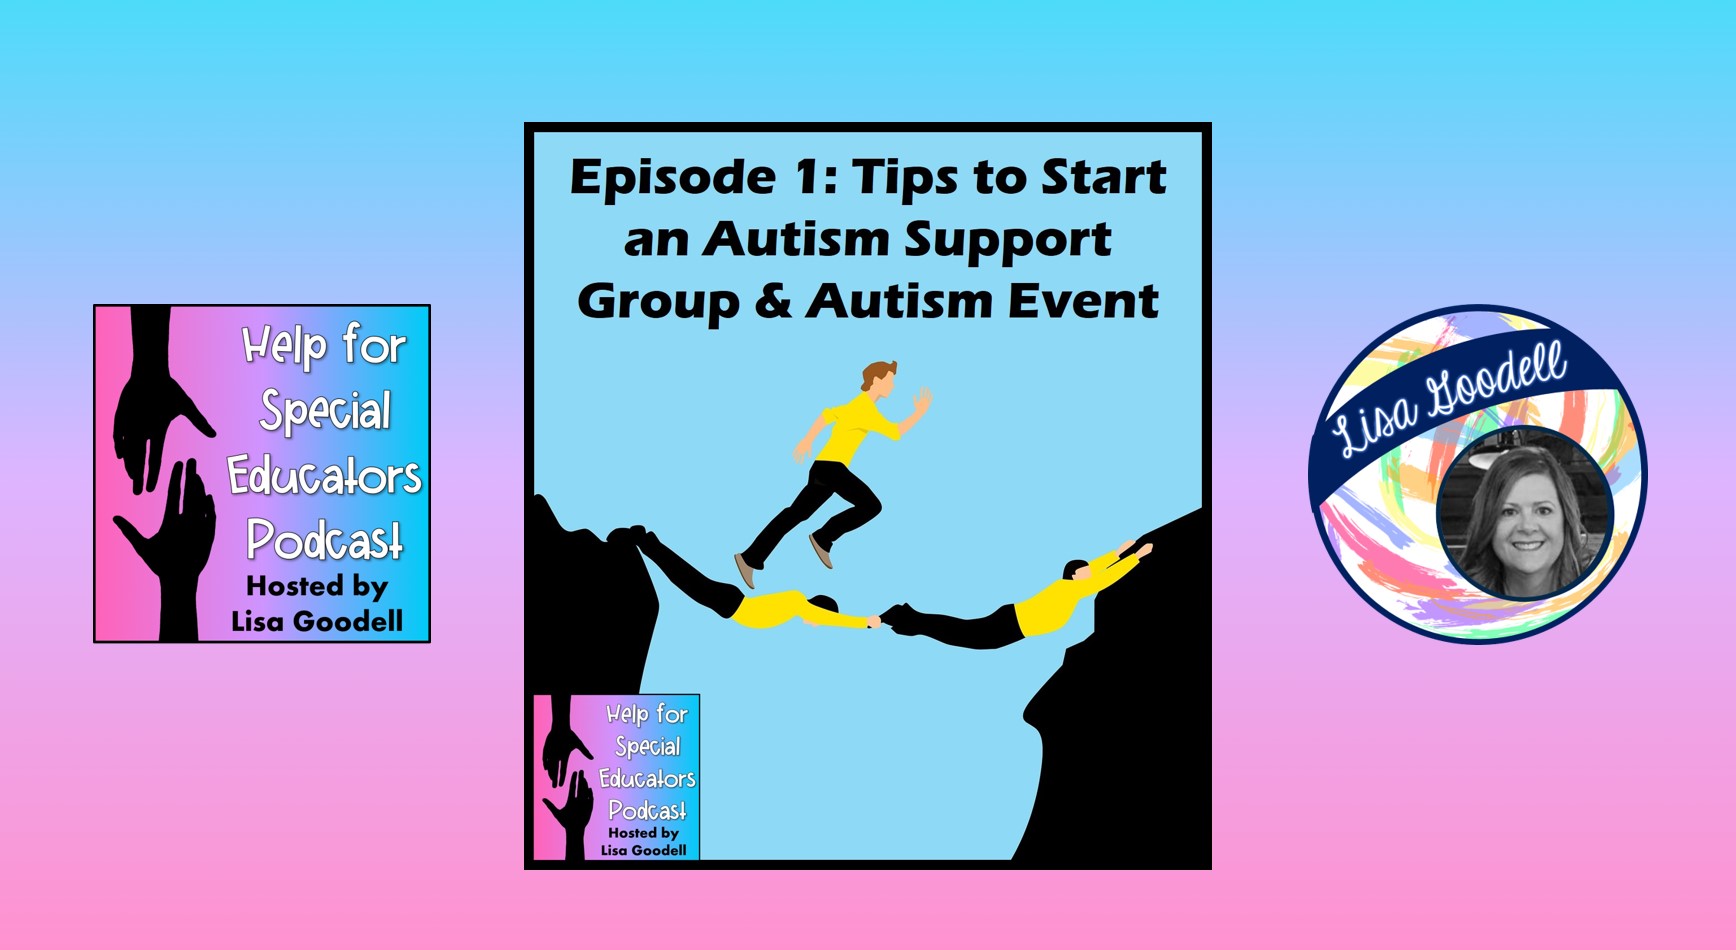 Tips to Start an Autism Support Group